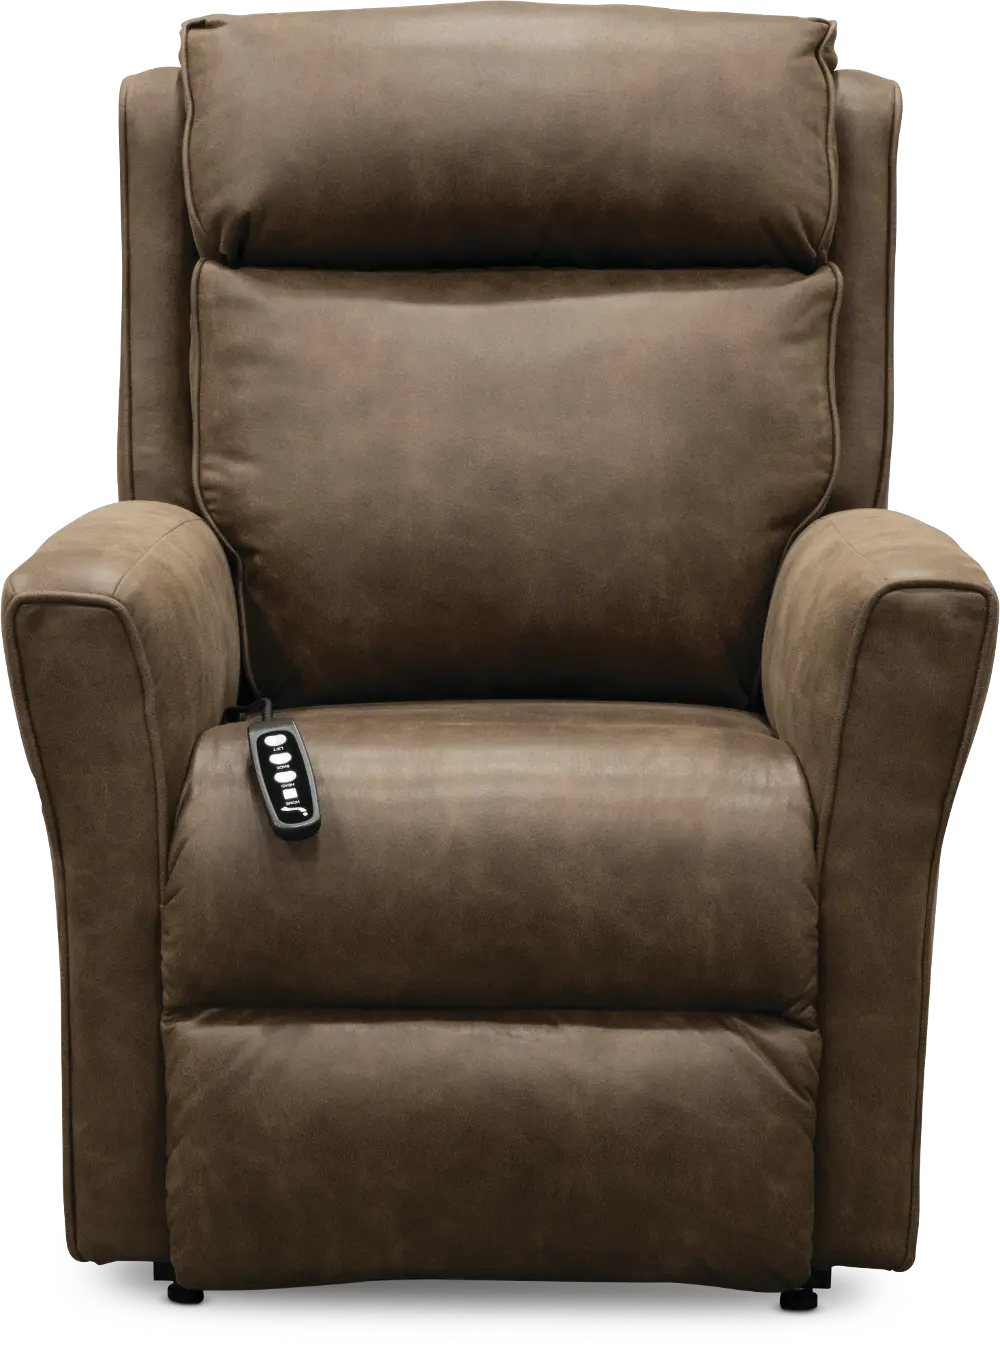 Taupe Power Reclining Lift Chair - Radiate-1